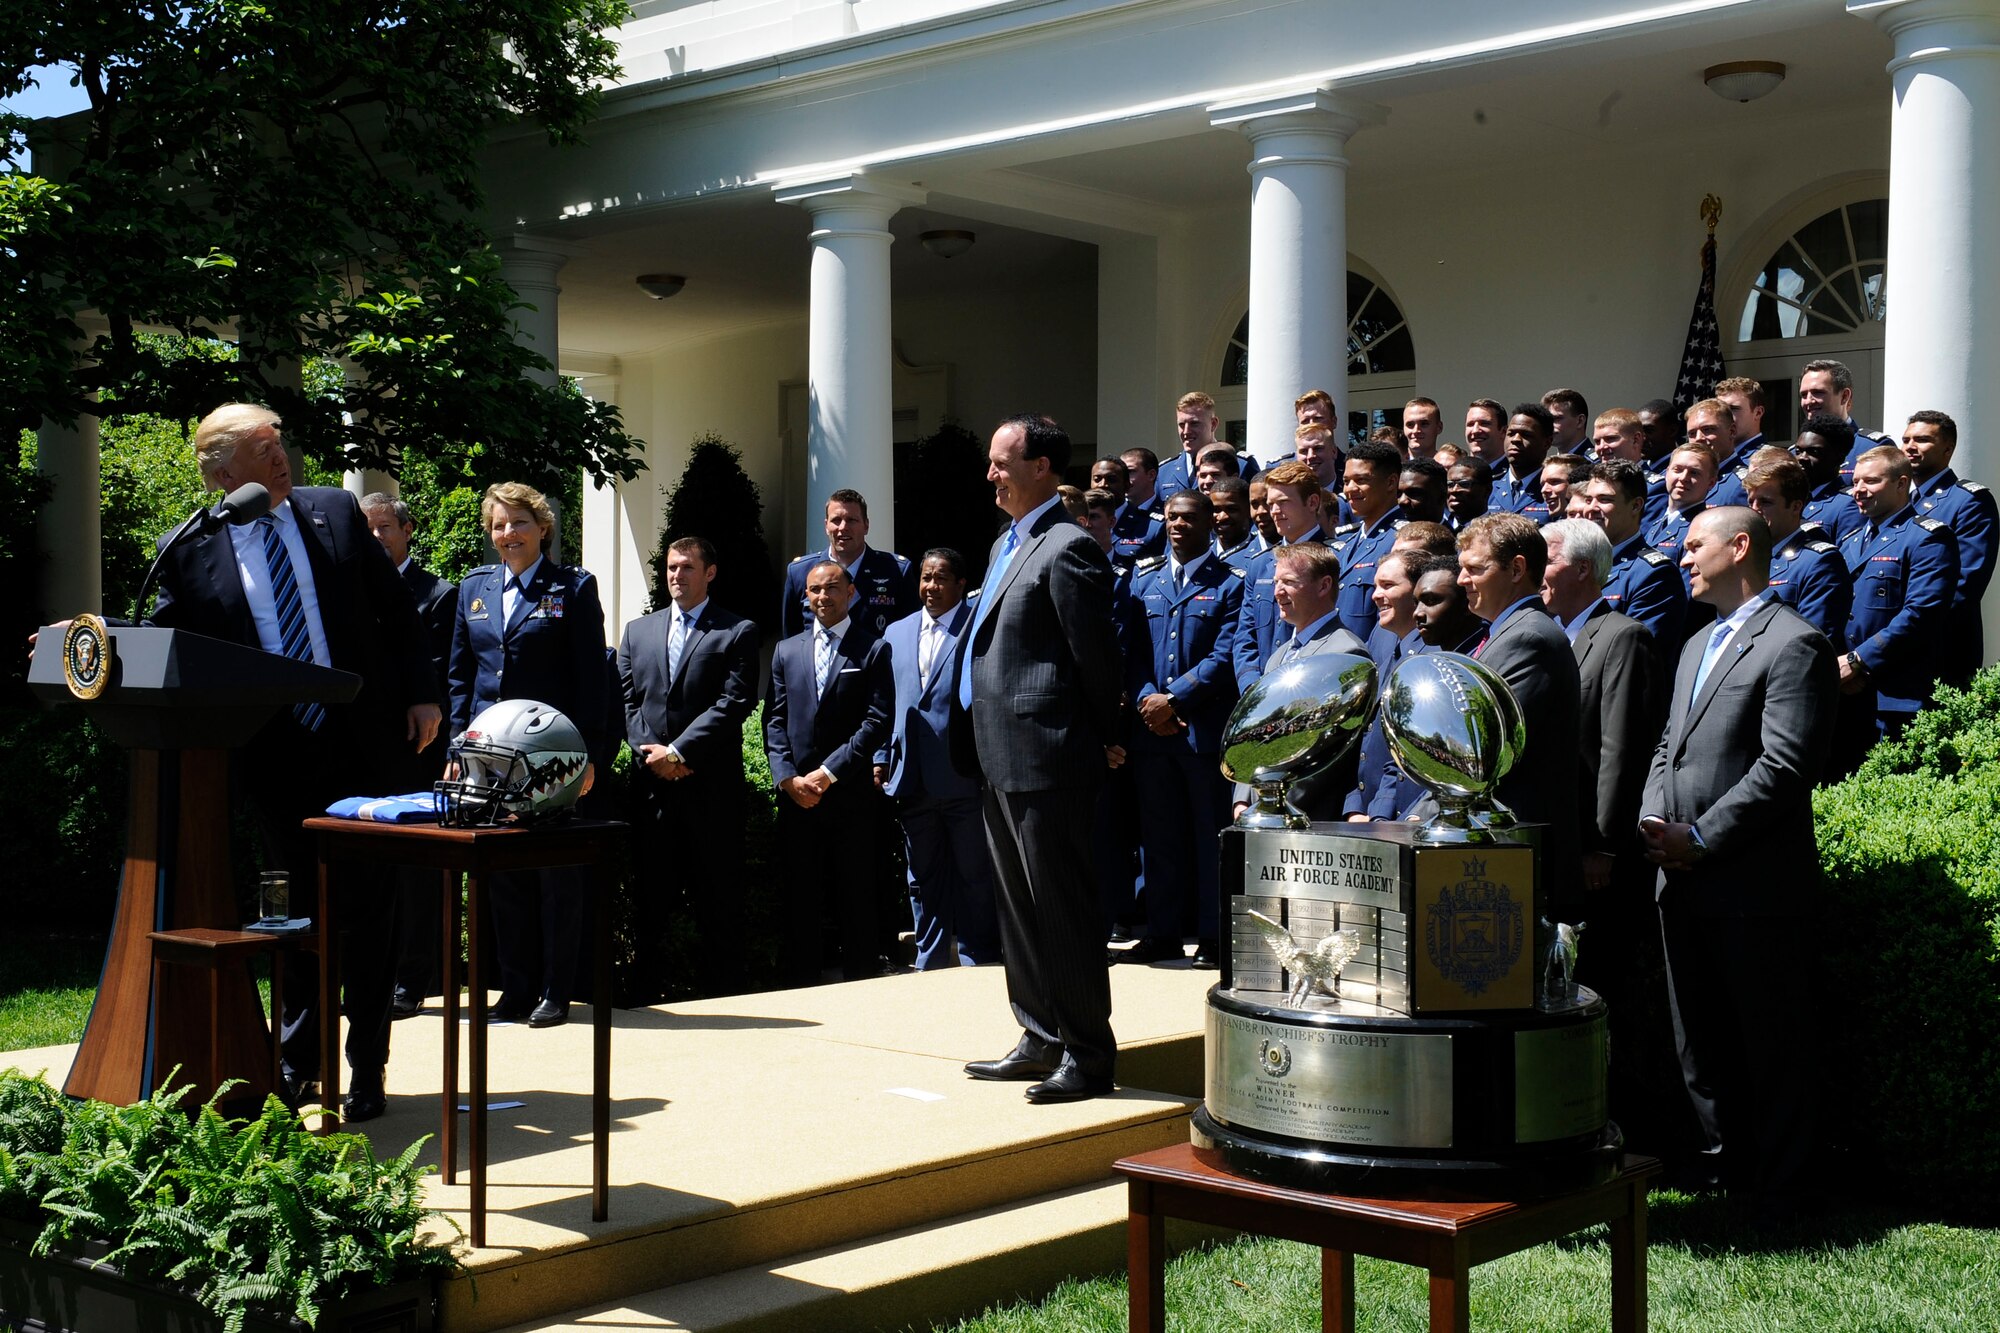 President Donald Trump congratulates the U.S. Air Force Academy football team with the Commander in Chief's Trophy at the White House May 2, 2017. With the team were Lt. Gen. Michelle D. Johnson, the U.S. Air Force Academy superintendent; Acting Secretary of the Air Force Lisa S. Disbrow; and Air Force Chief of Staff Gen. David L. Goldfein. (U.S. Air Force photo/Staff Sgt. Jannelle McRae)